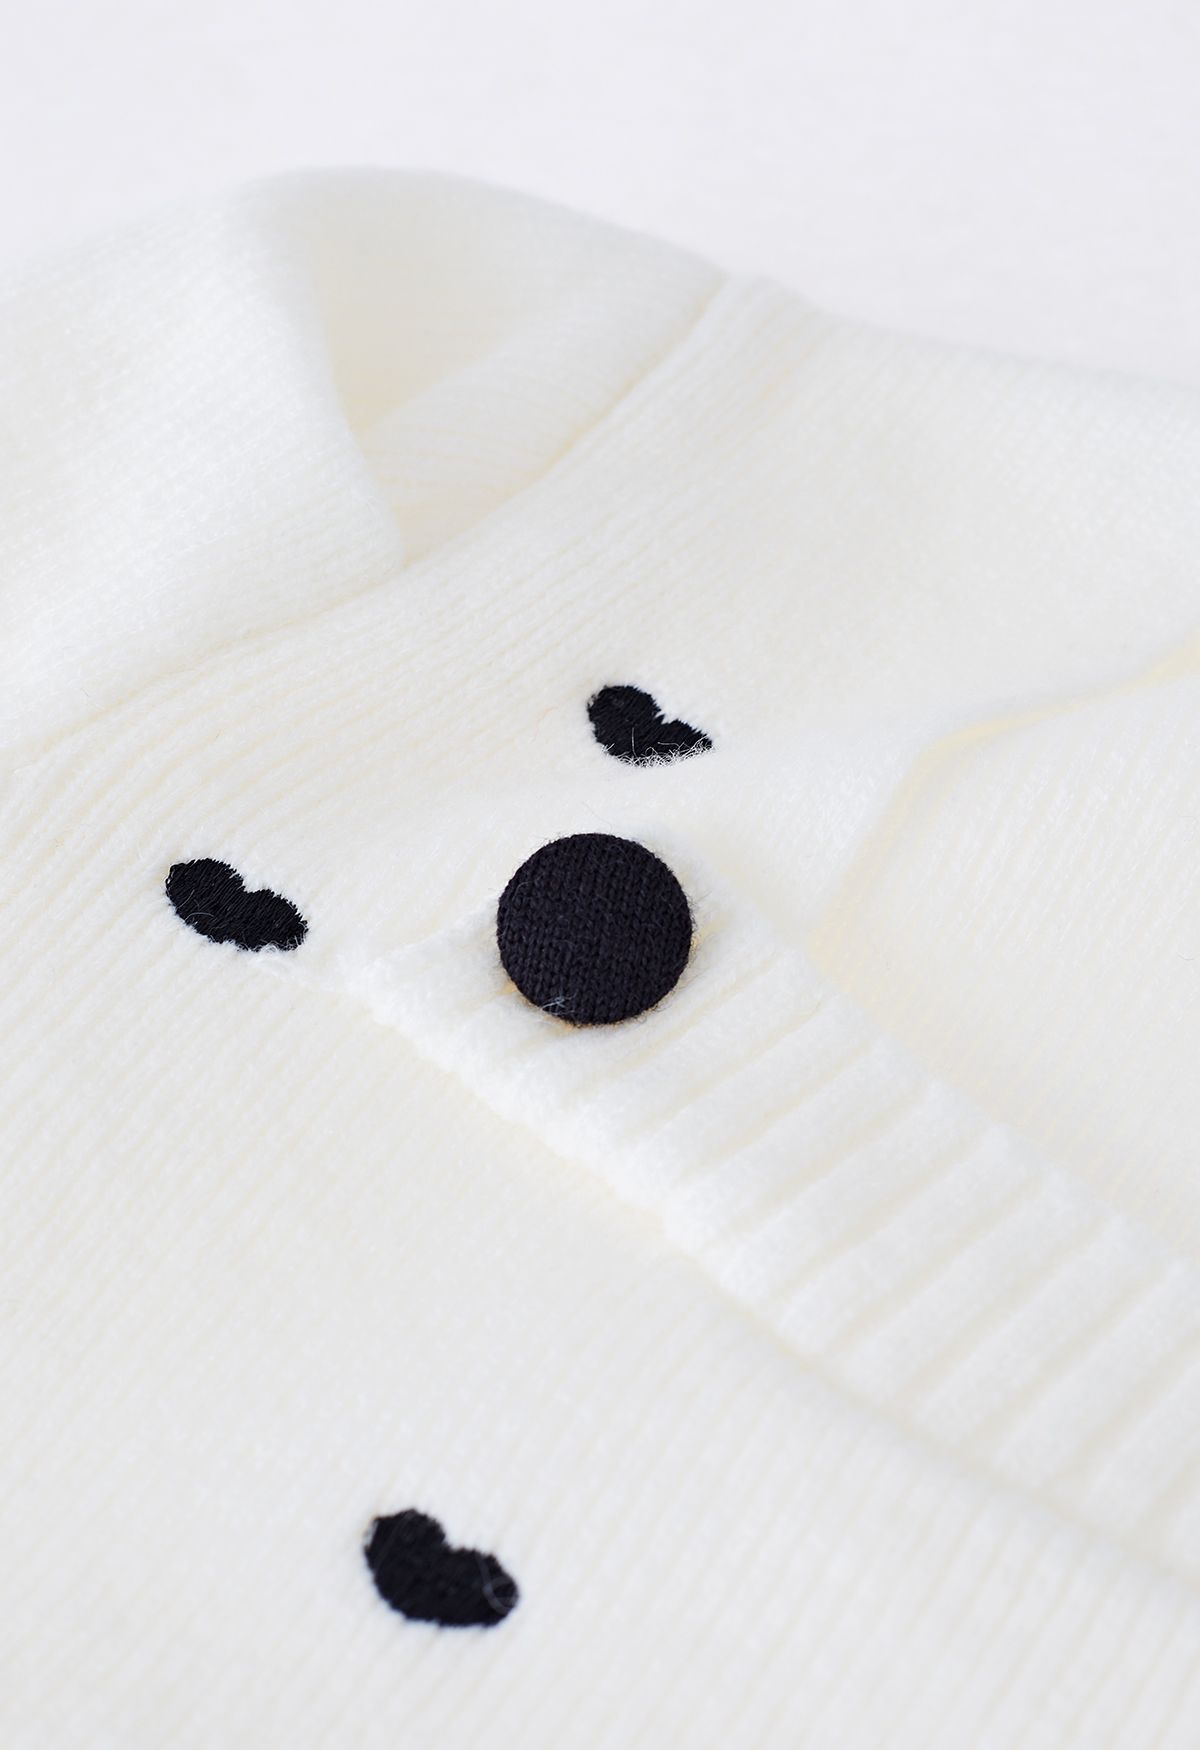 Full of Little Heart Square Neck Knit Sweater in White